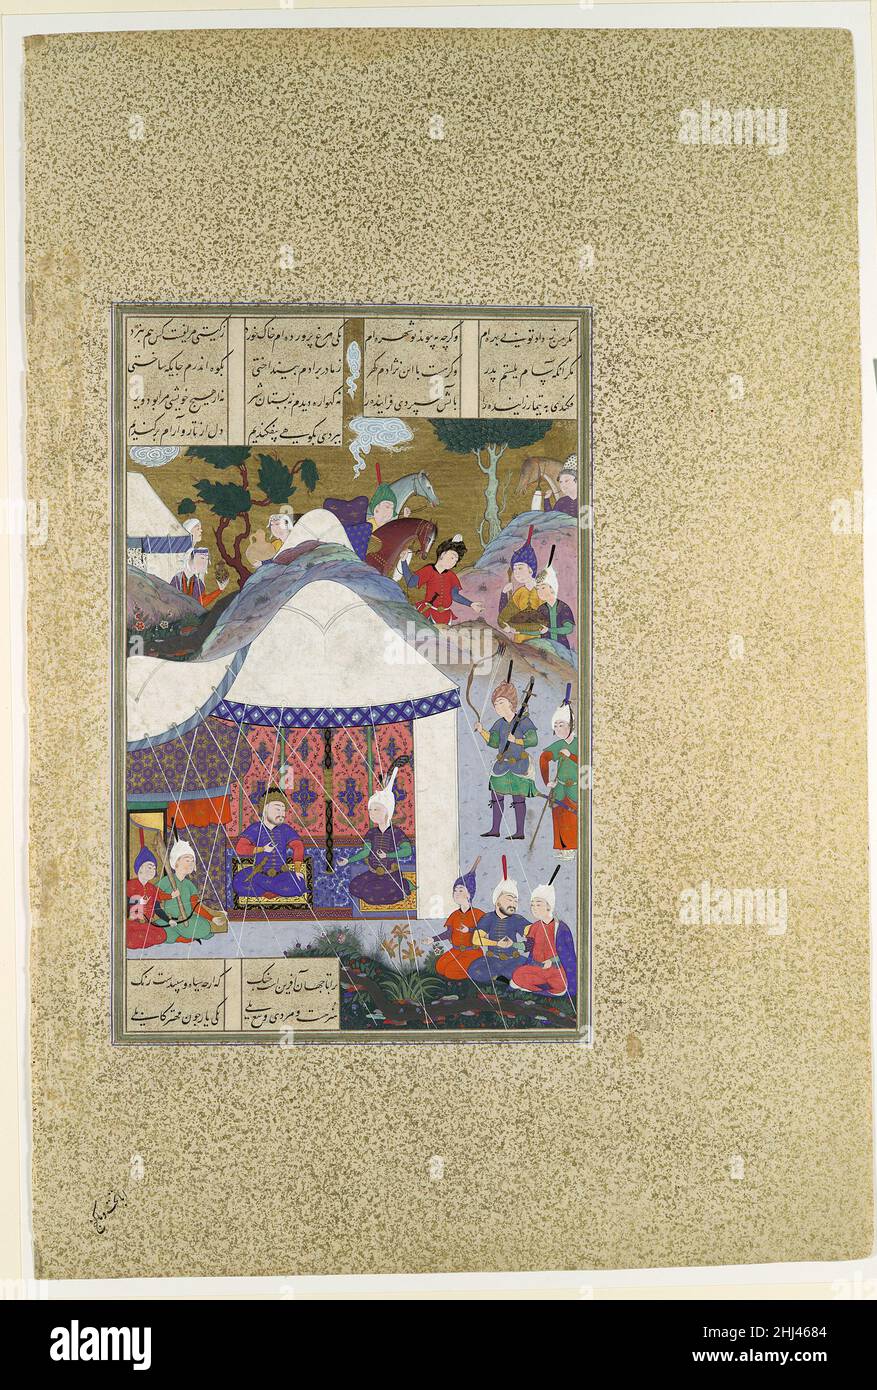 'Zal Questions Sam's Intentions Regarding the House of Mihrab', Folio 81v from the Shahnama (Book of Kings) of Shah Tahmasp ca. 1525–30 Abu'l Qasim Firdausi As word spreads to Kabul that Sam will soon be waging war against Mihrab, Zal decides to fight to defend Rudaba and her father. He returns to meet with Sam, determined to win him over. After Zal reminds Sam of his broken promise, Sam hatches a plan. He will write a letter for Zal to deliver to Manuchihr. Seeing Zal in person will cause the shah to relent.. 'Zal Questions Sam's Intentions Regarding the House of Mihrab', Folio 81v from the S Stock Photo